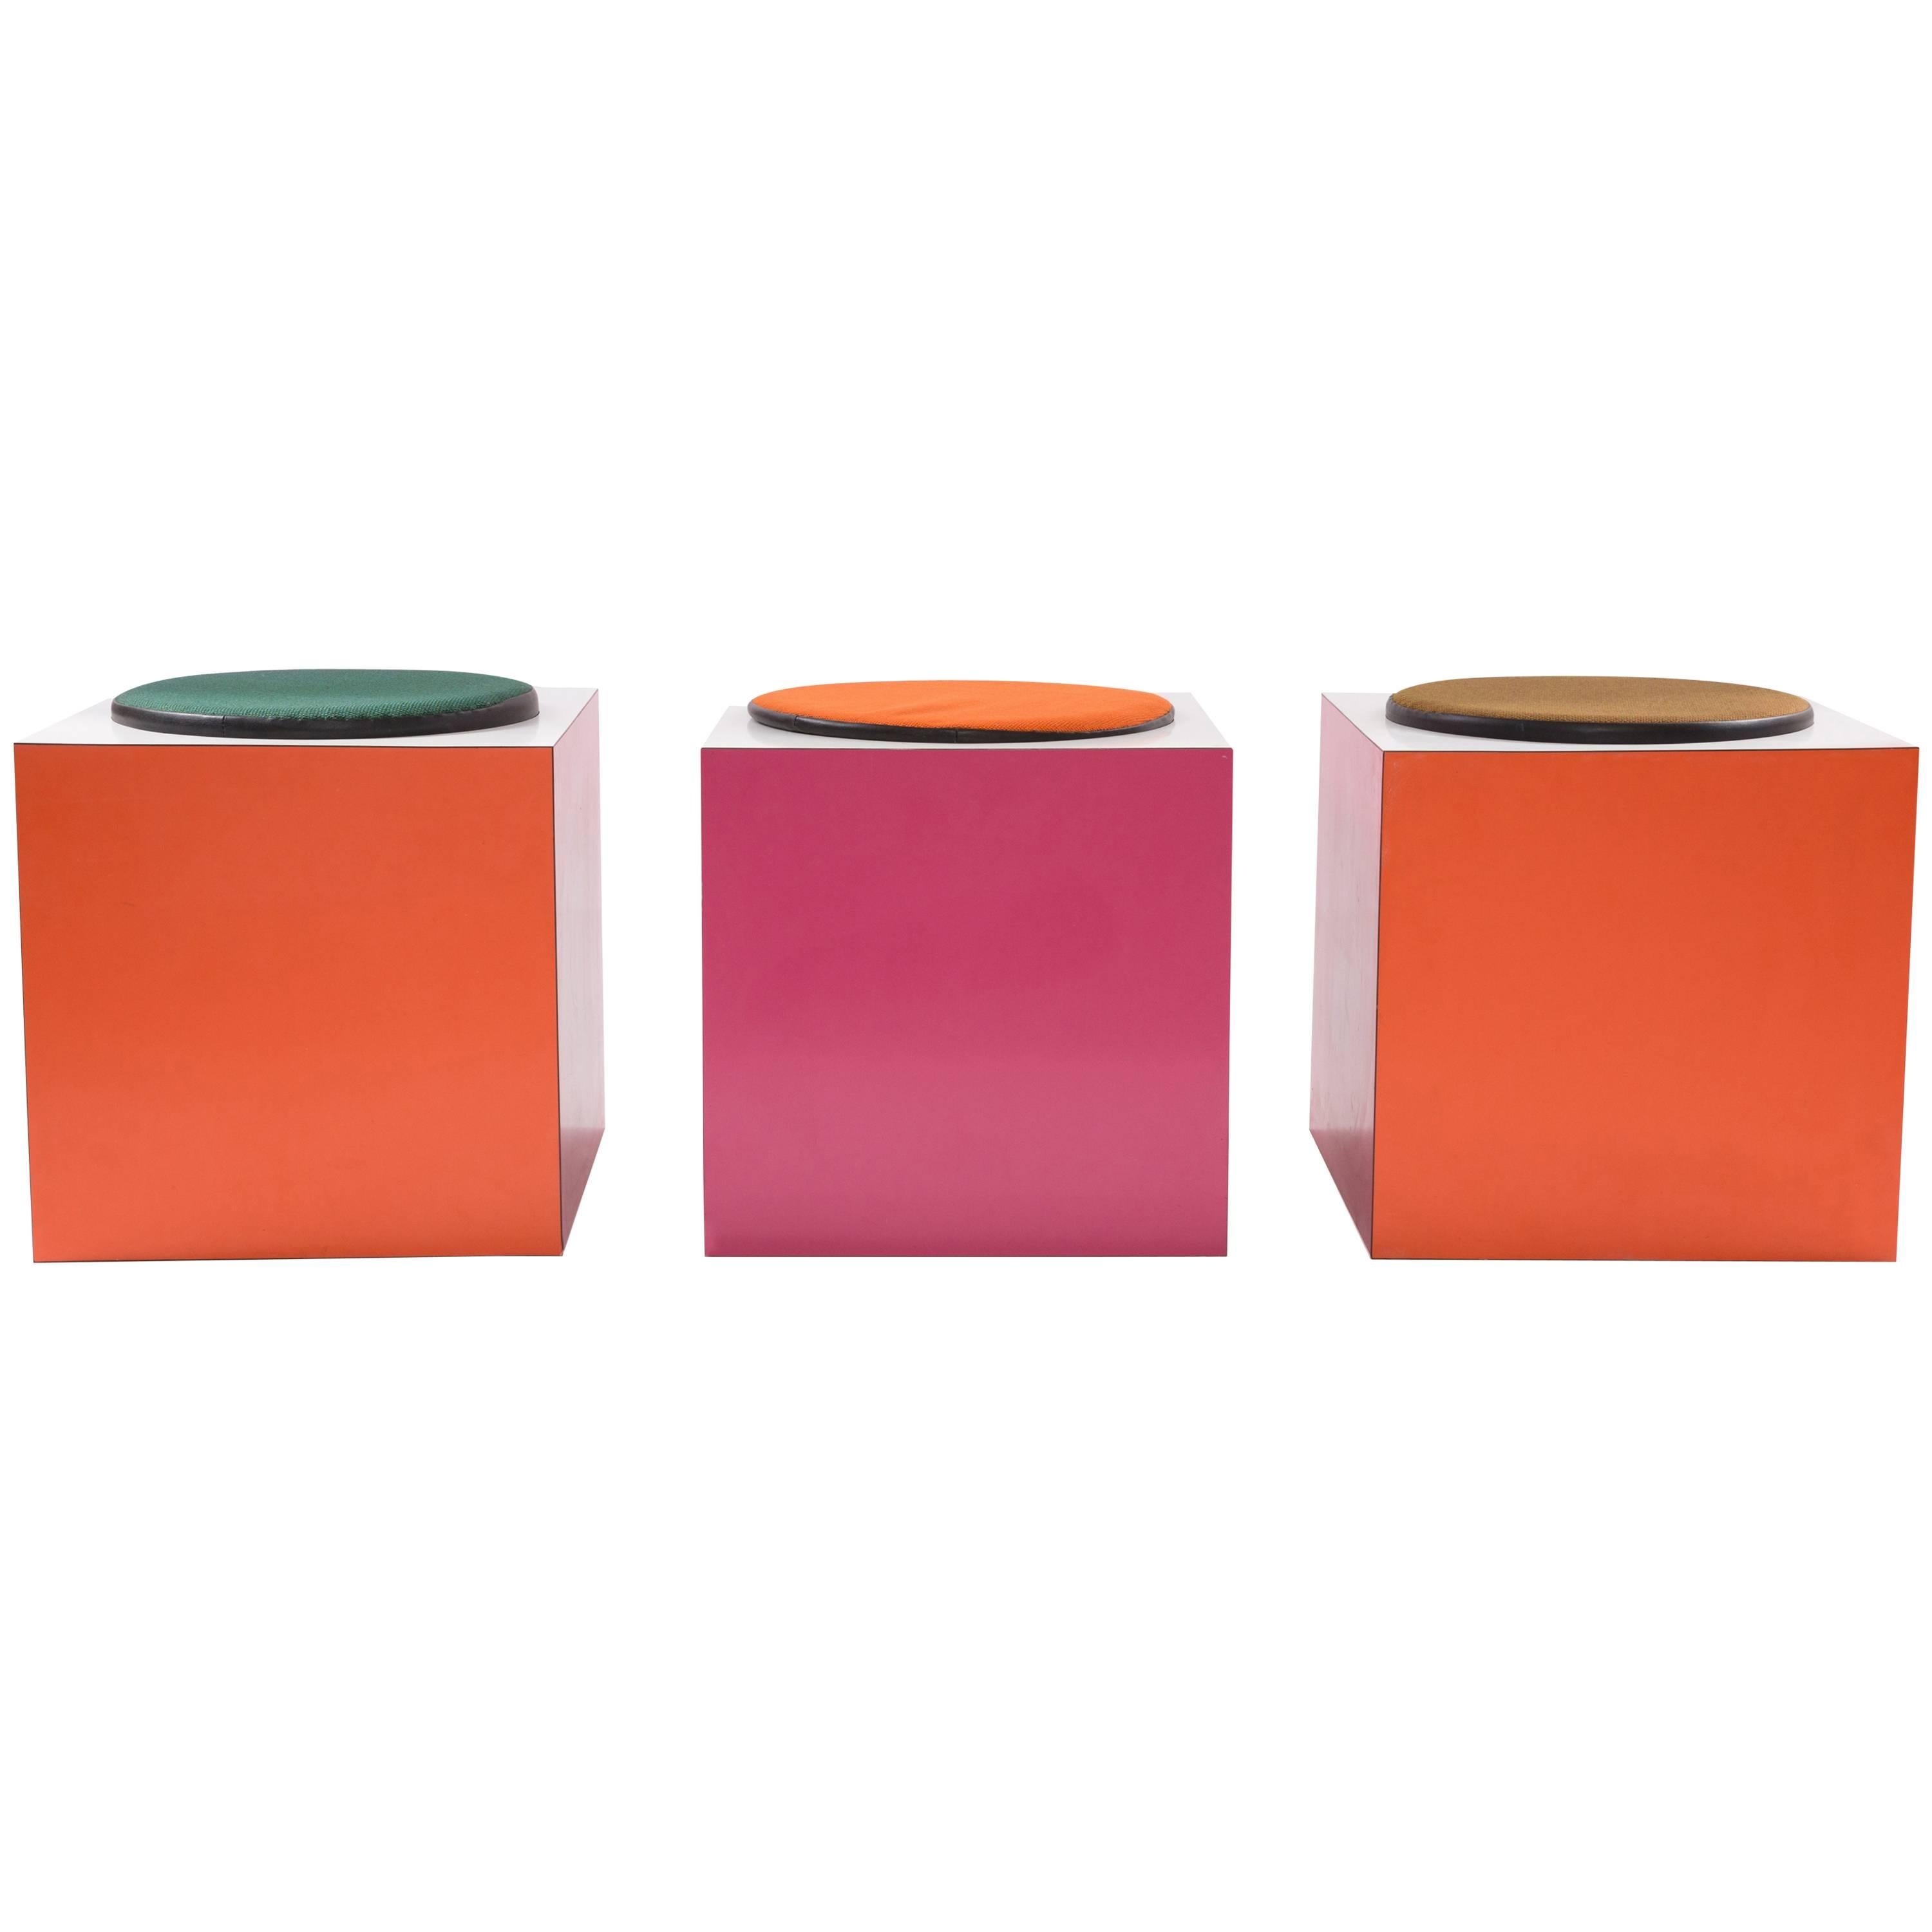 Cube Ottomans from 1967 Montreal World Expo